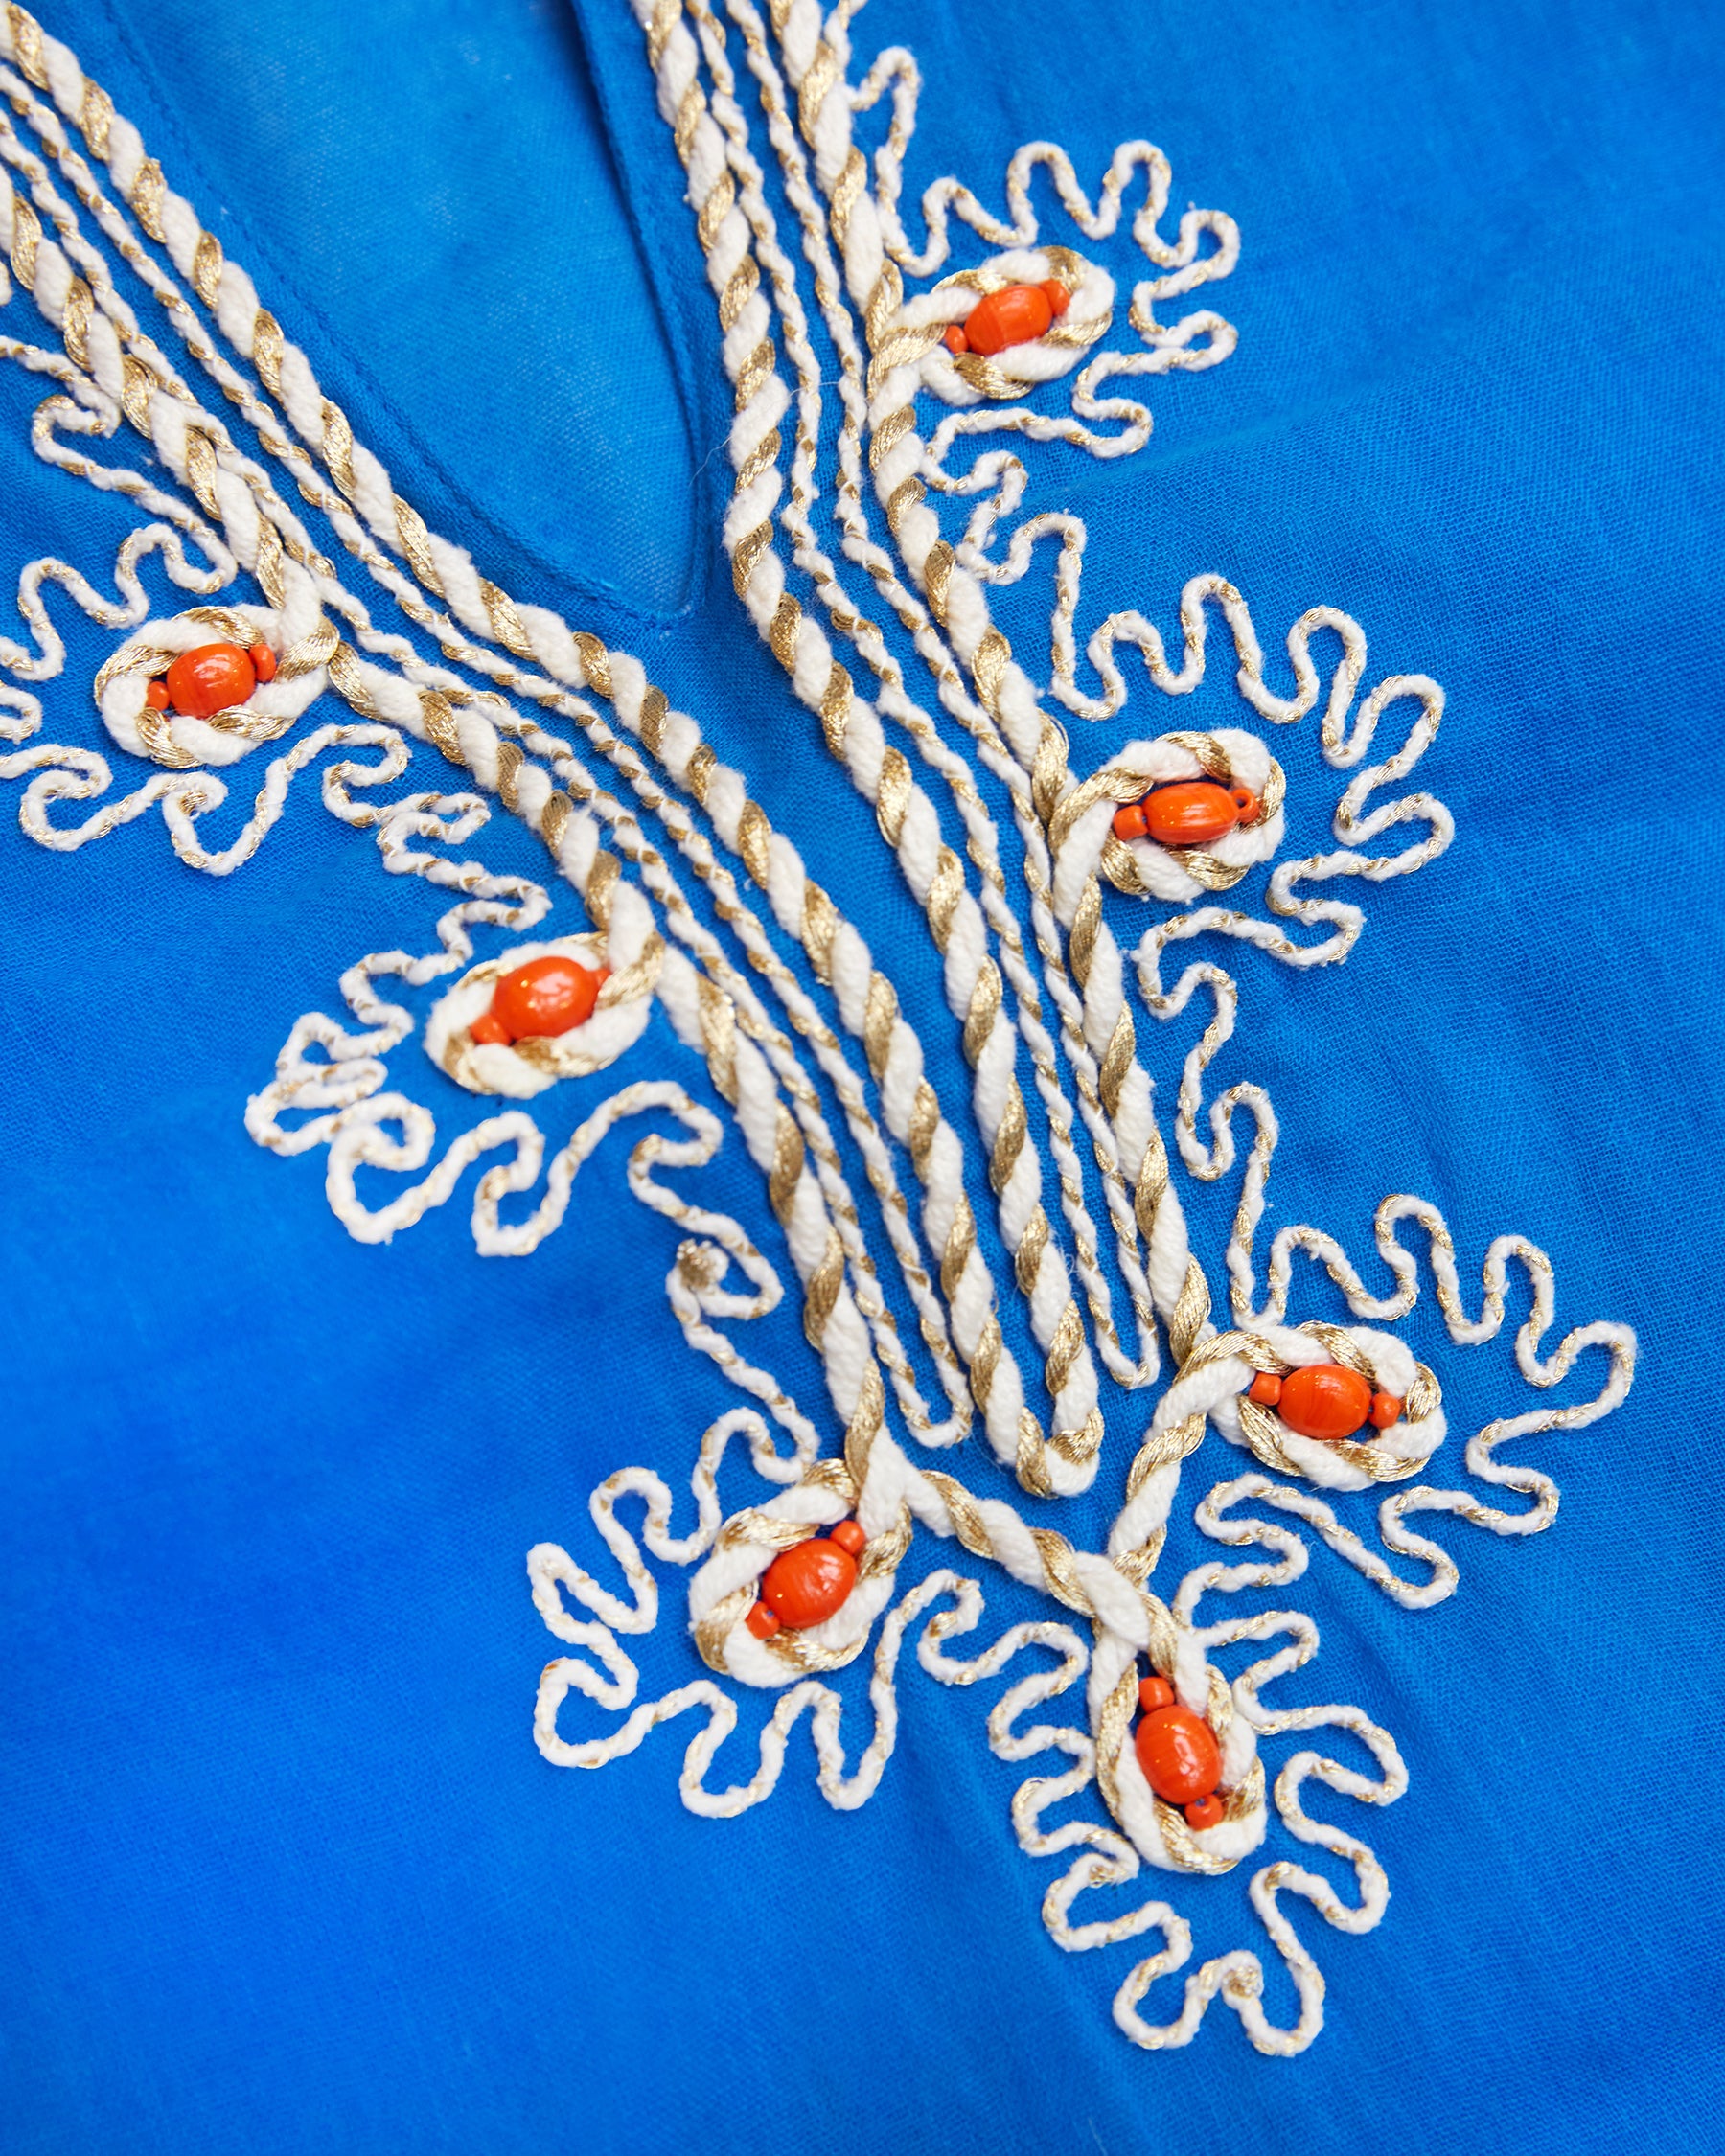 Mallorca Tunic with Coral Embellishment-Detail of Embellishment